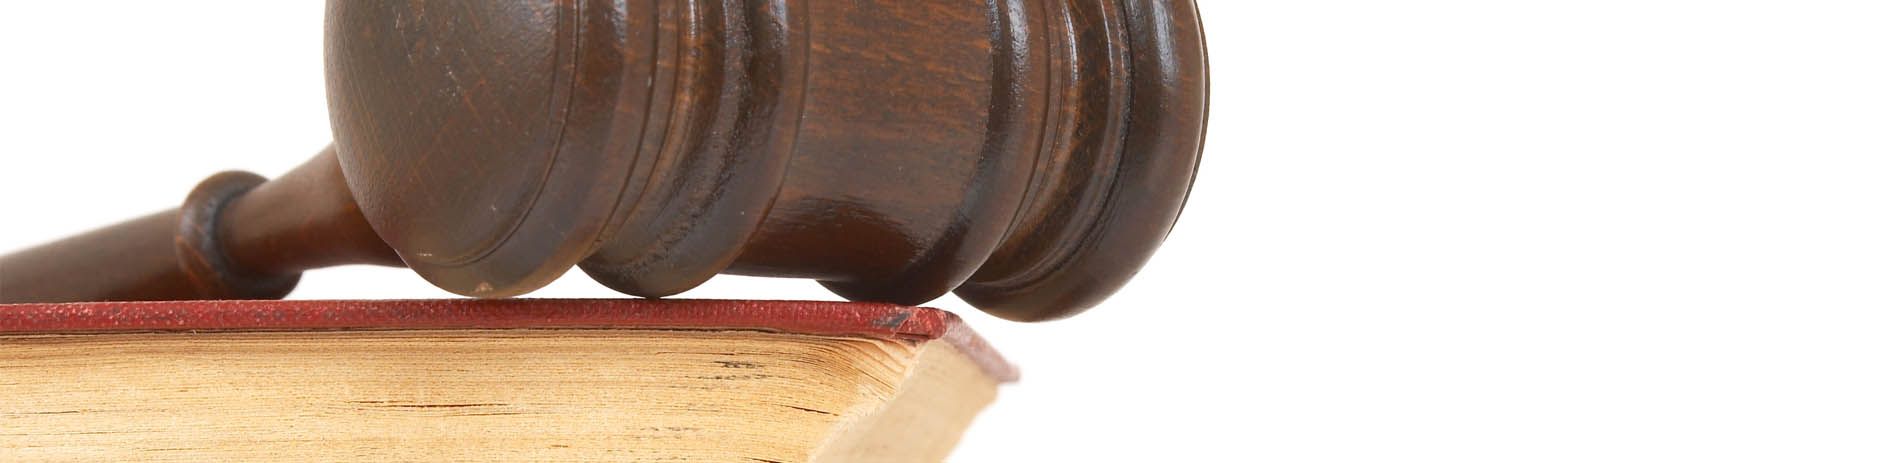 a wooden gavel is sitting on top of a piece of wood .